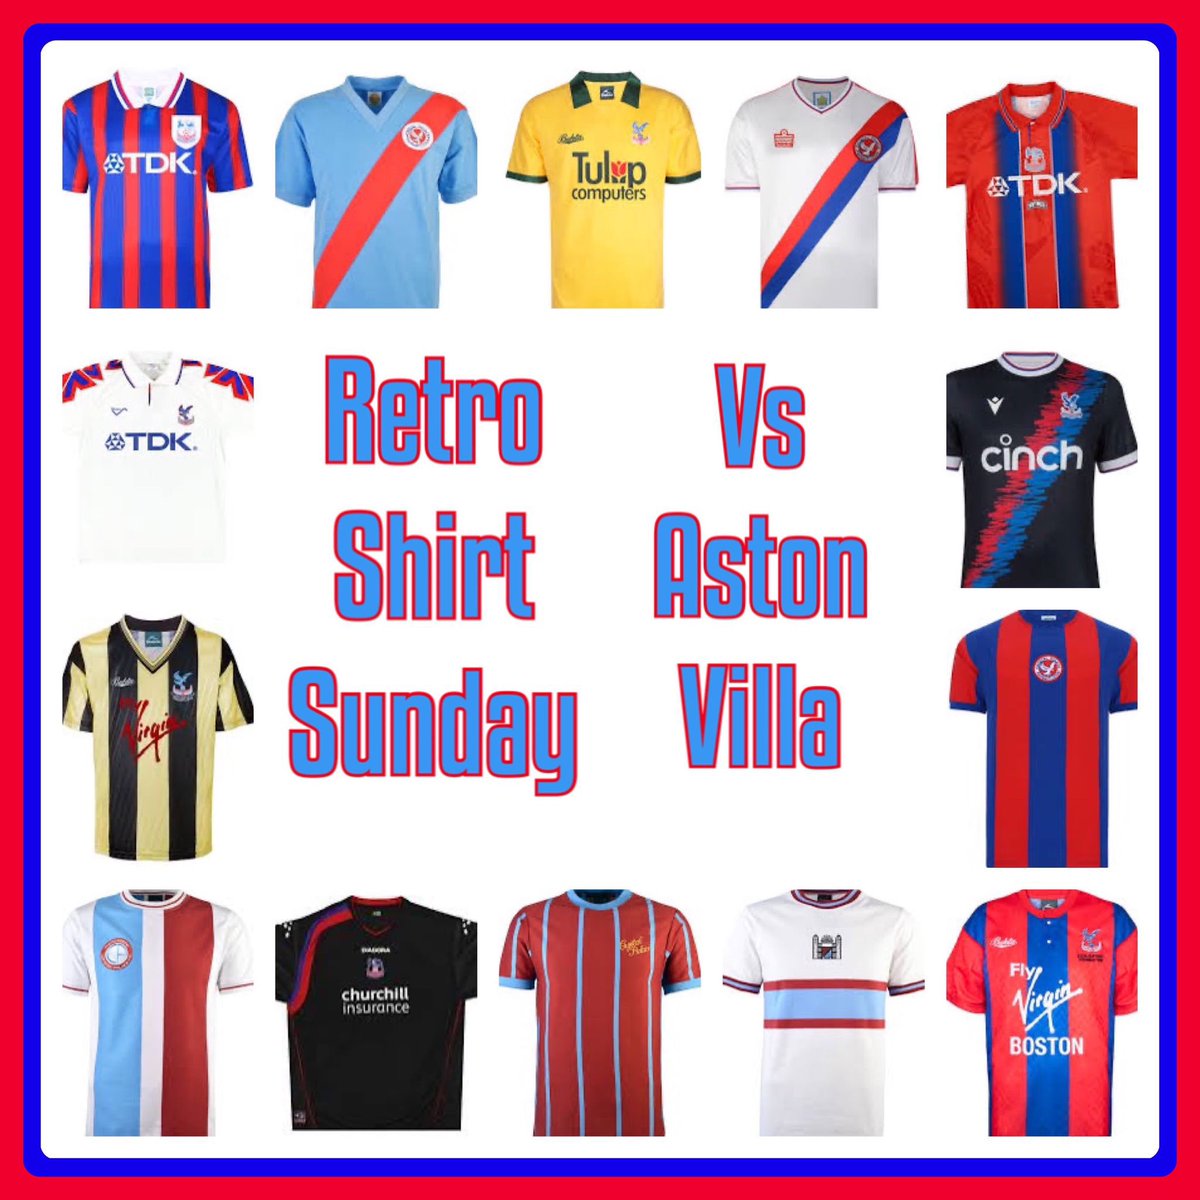 Villa at home 2morw is going to be Retro Shirt Sunday Just abit of fun and a way to show off your favourite retro #cpfc shirts whilst adding colour to Selhurst Park ❤️💙 Please spread the word RT welcome #upthepalace #uptheretro #uptheflags